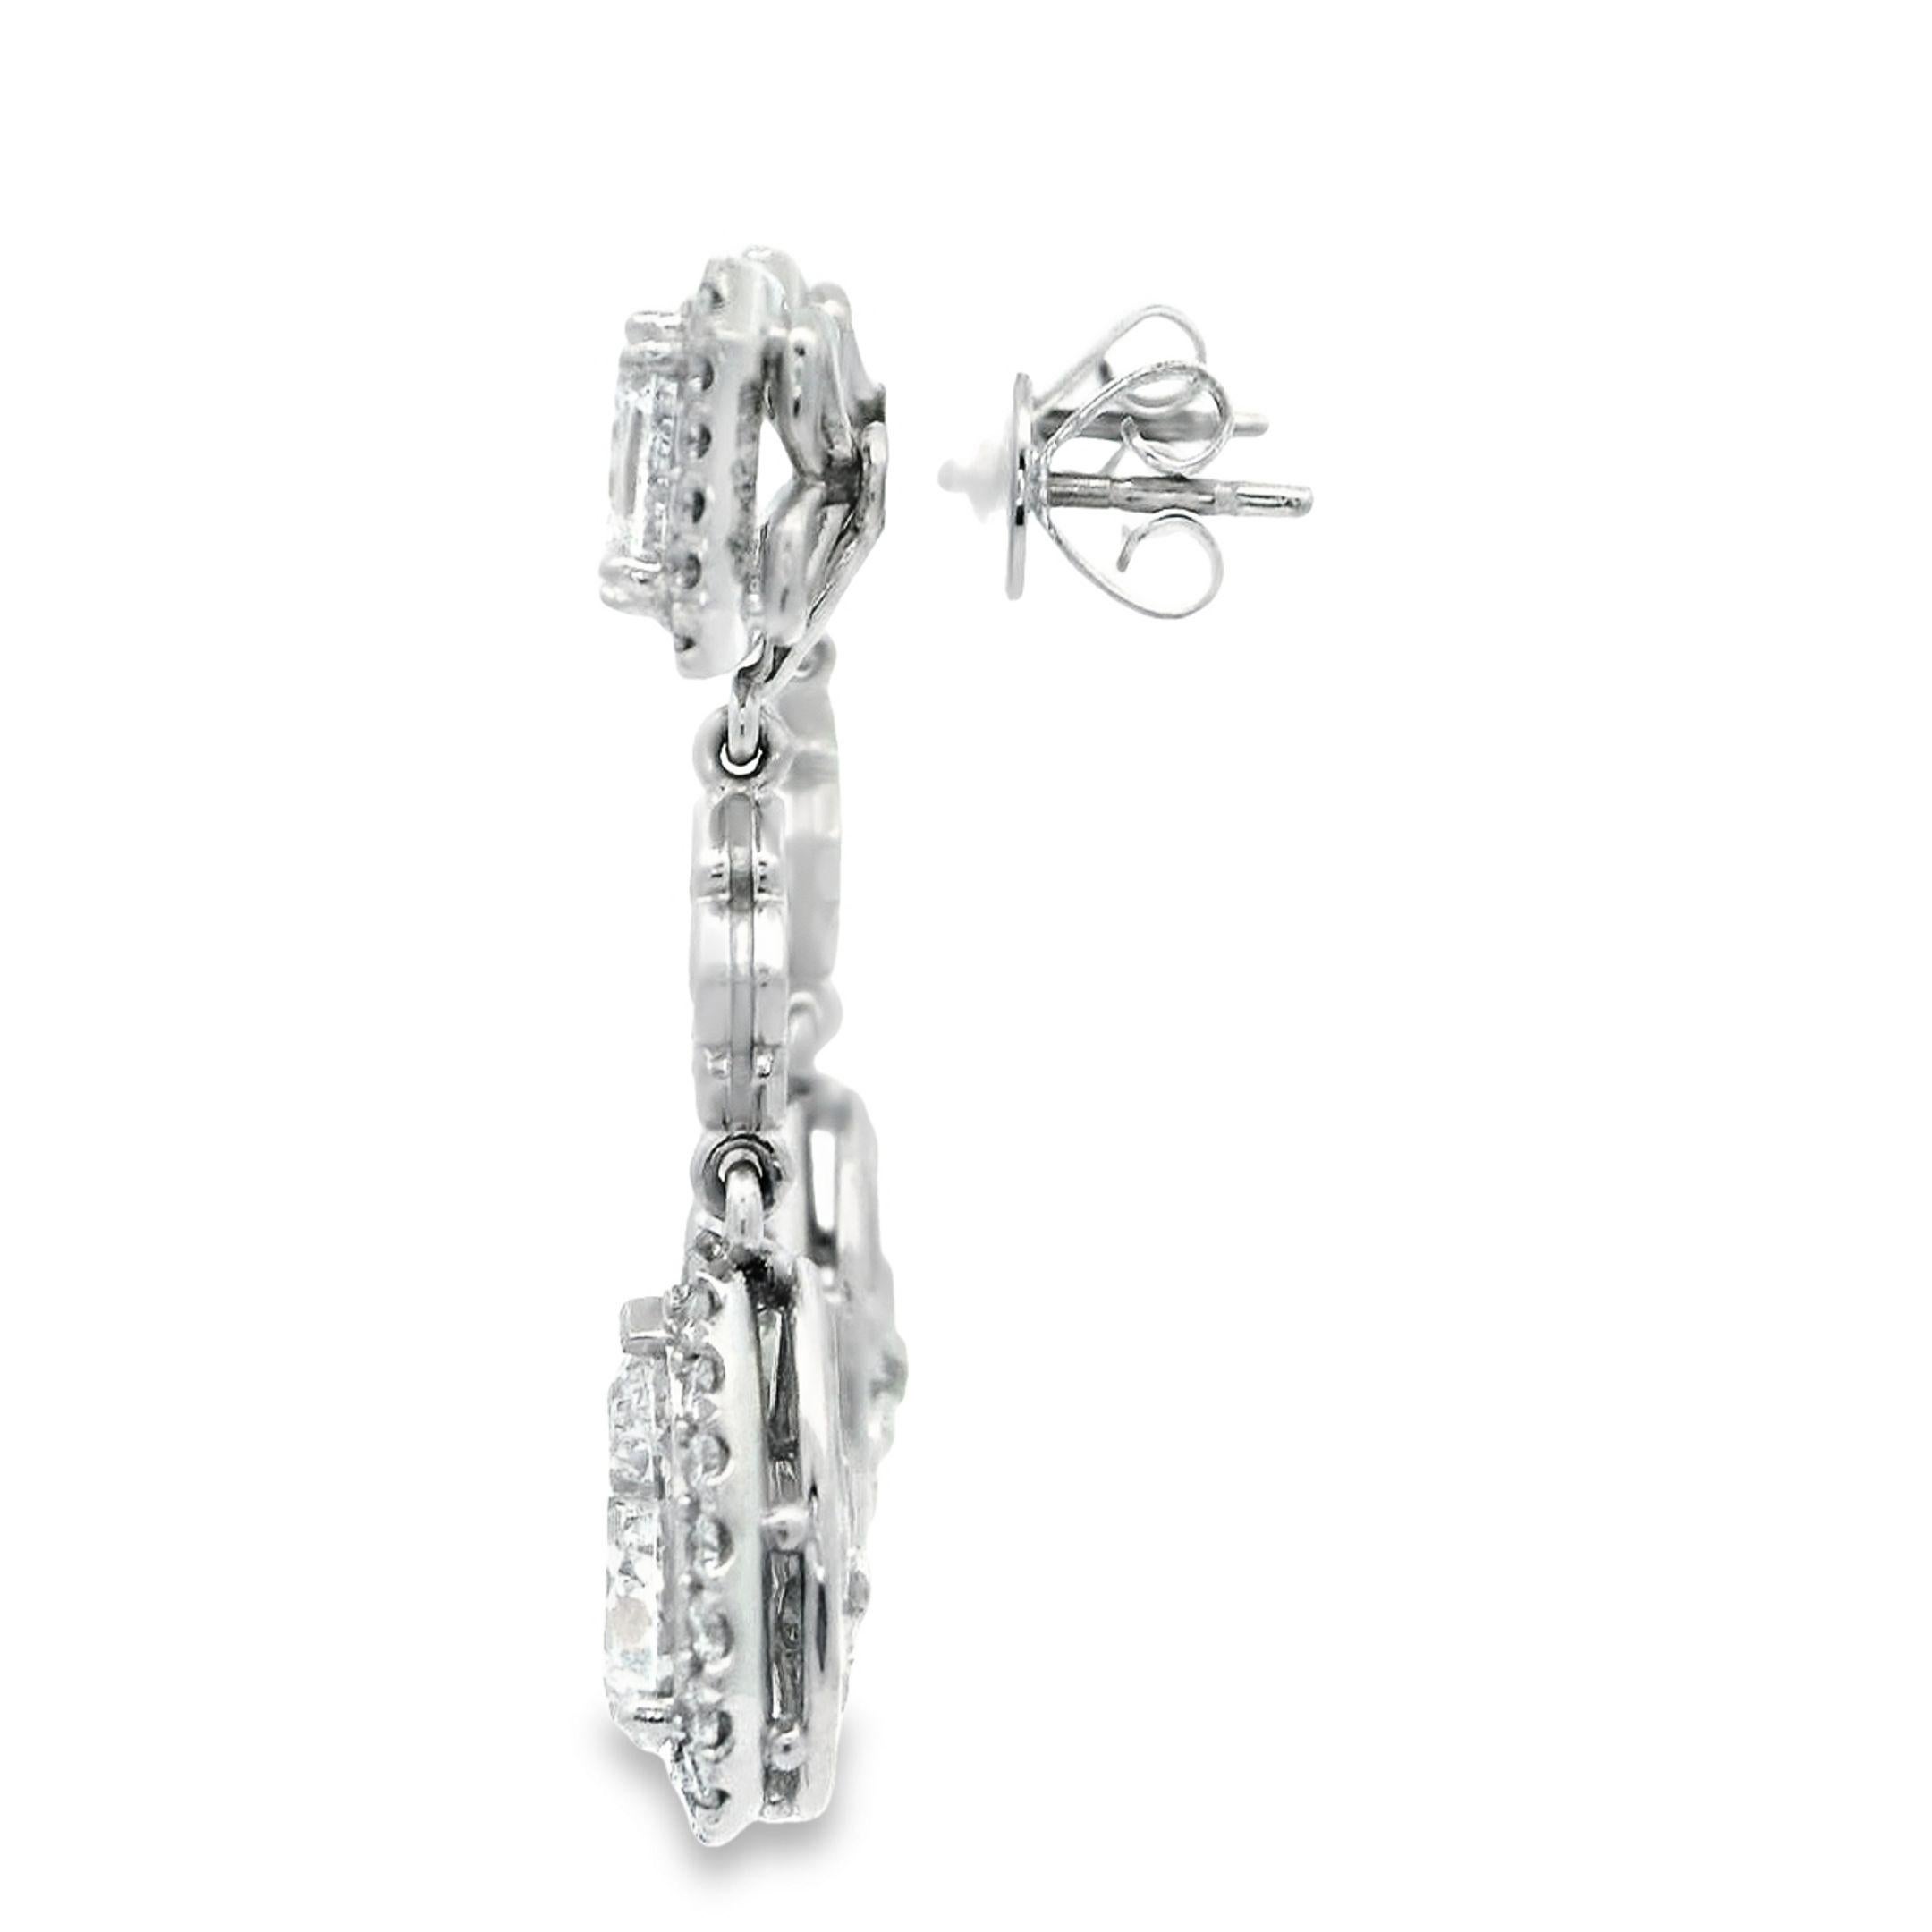 Alex & Co GIA Asscher Cut and Pear Shape 5.10ct Diamond Platinum Drop Earrings In New Condition For Sale In Newton, MA